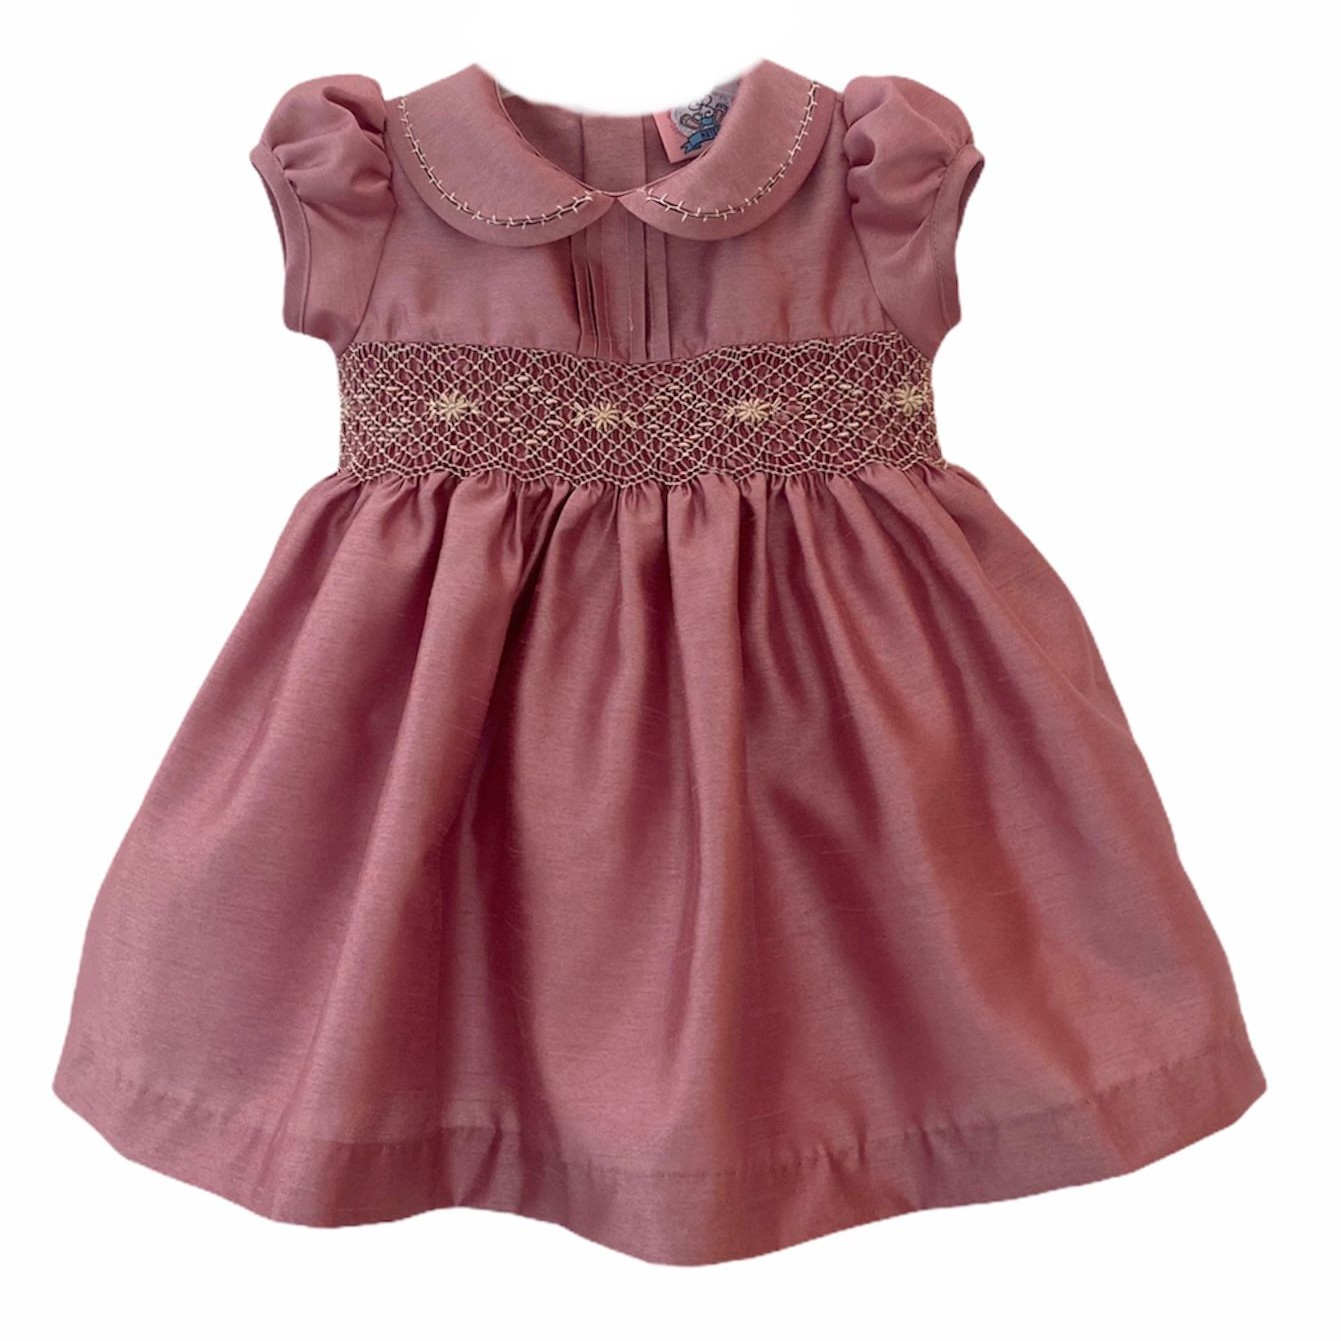 Girl's Dress with Hand Embroidery - Pink Color with Gold Embroidery